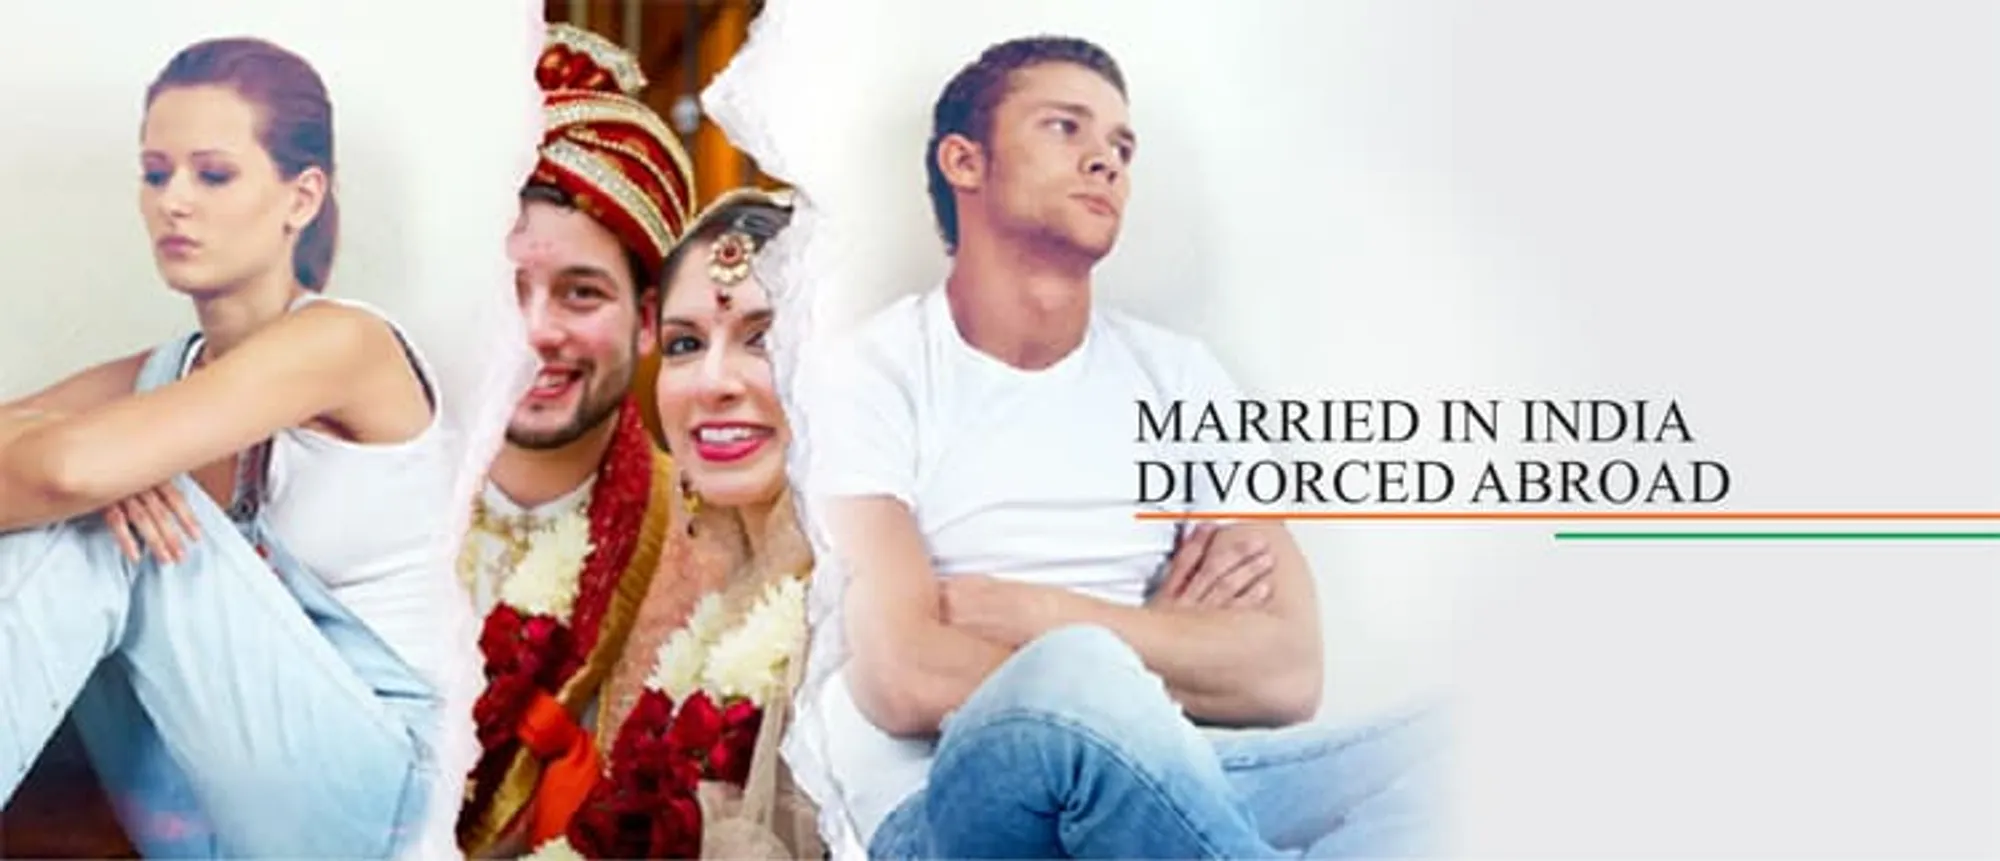 Married in India and Divorced Abroad